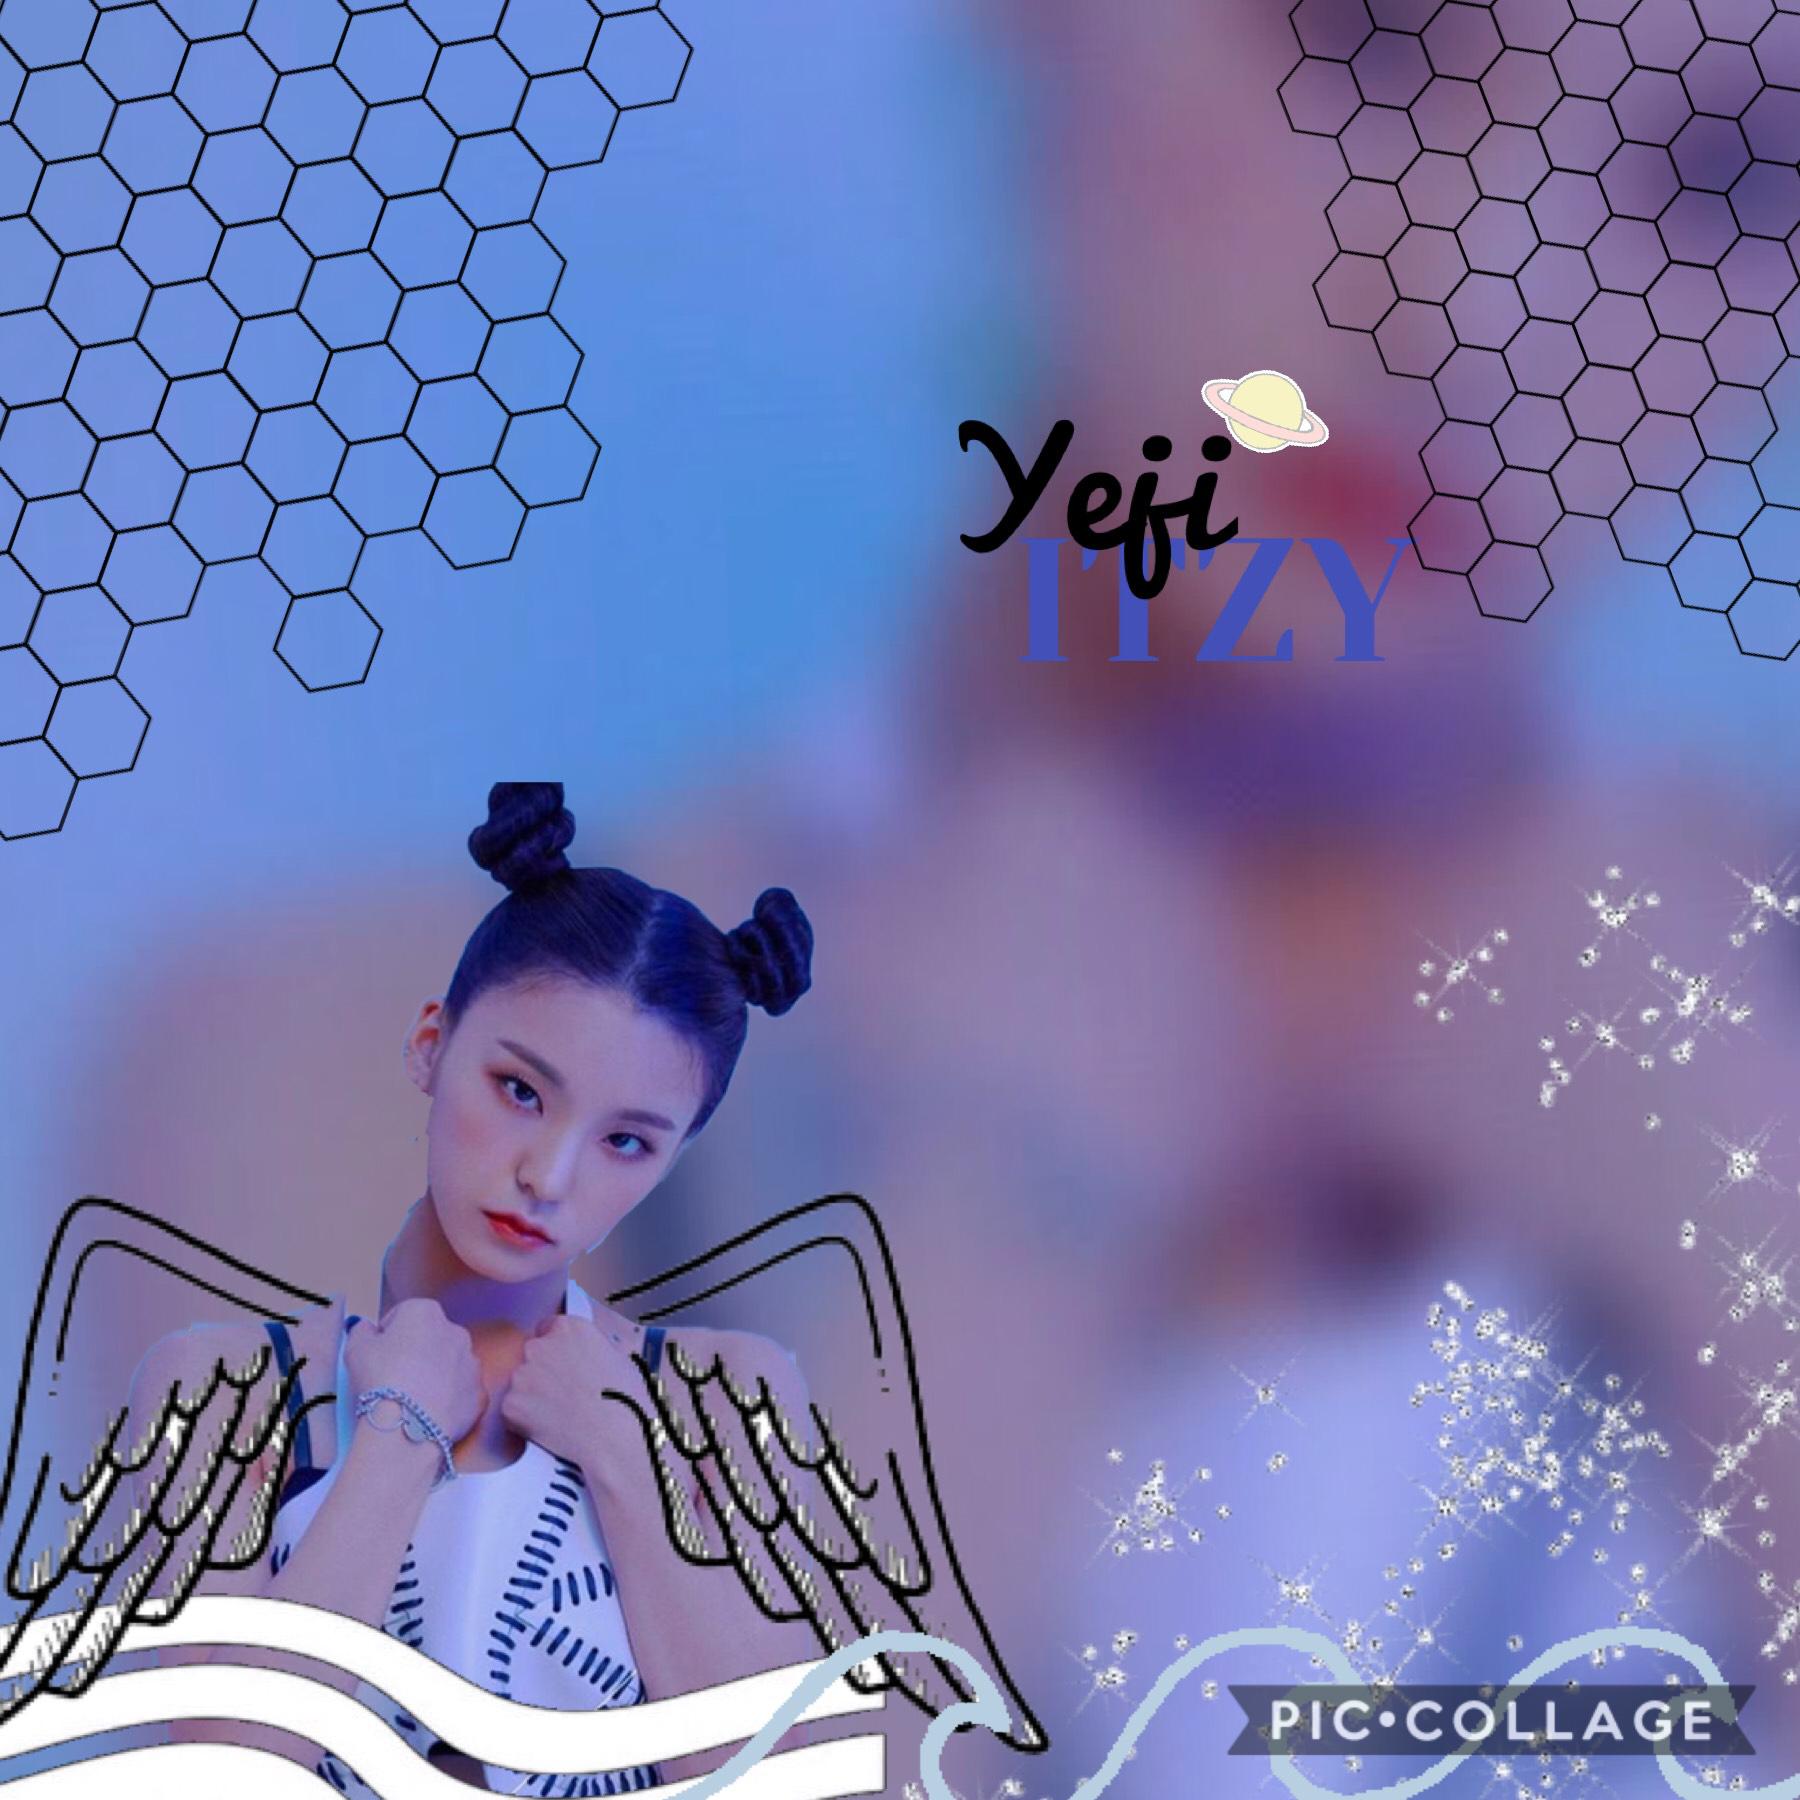 💙TAP💙

(yeji from ITZY) Like and follow for follow💙